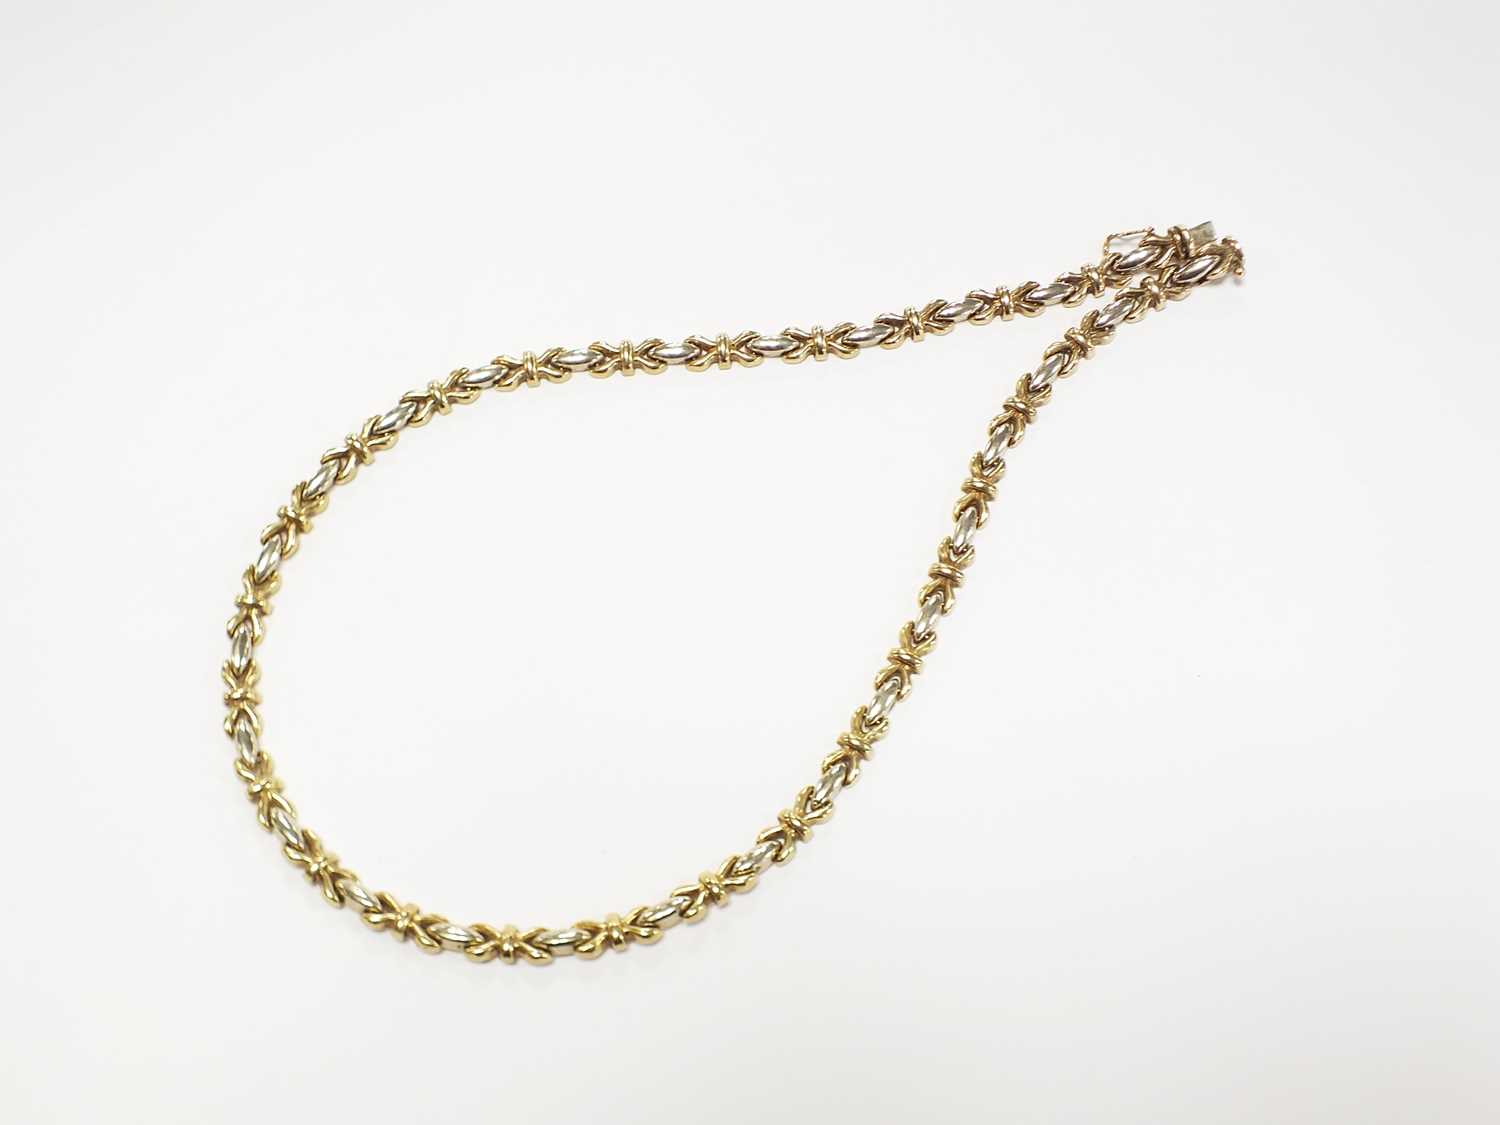 Lot 243 - A 9ct yellow and white gold cross and bar link chain necklace